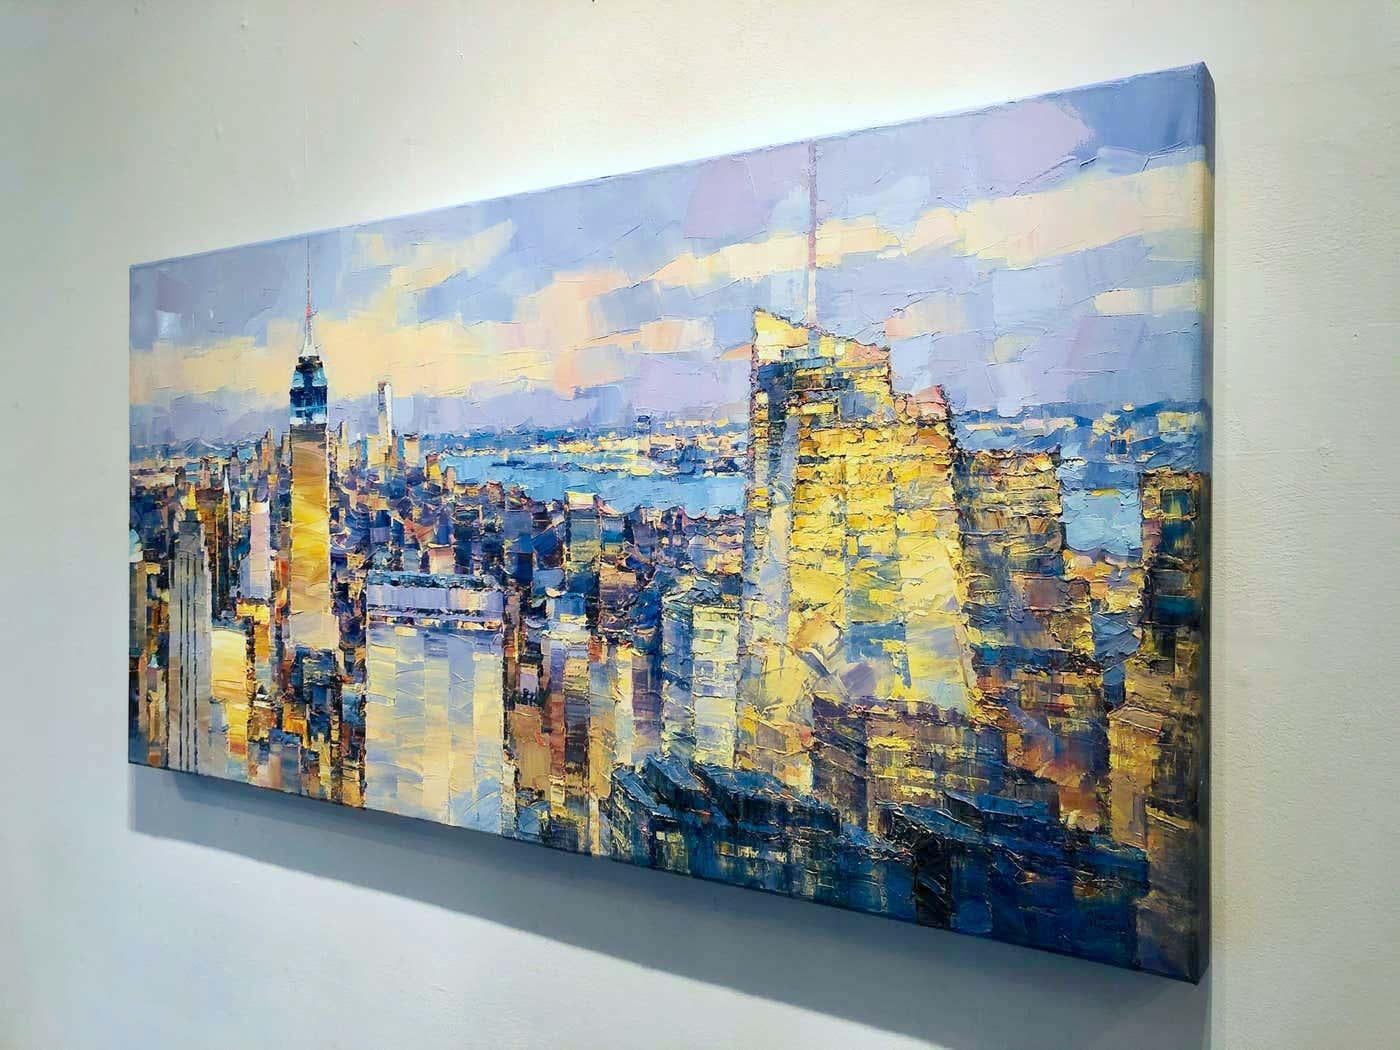 NYC Panorama-original abstract cityscape-landscape oil painting-contemporary Art - Abstract Expressionist Painting by Alex Hook Krioutchkov